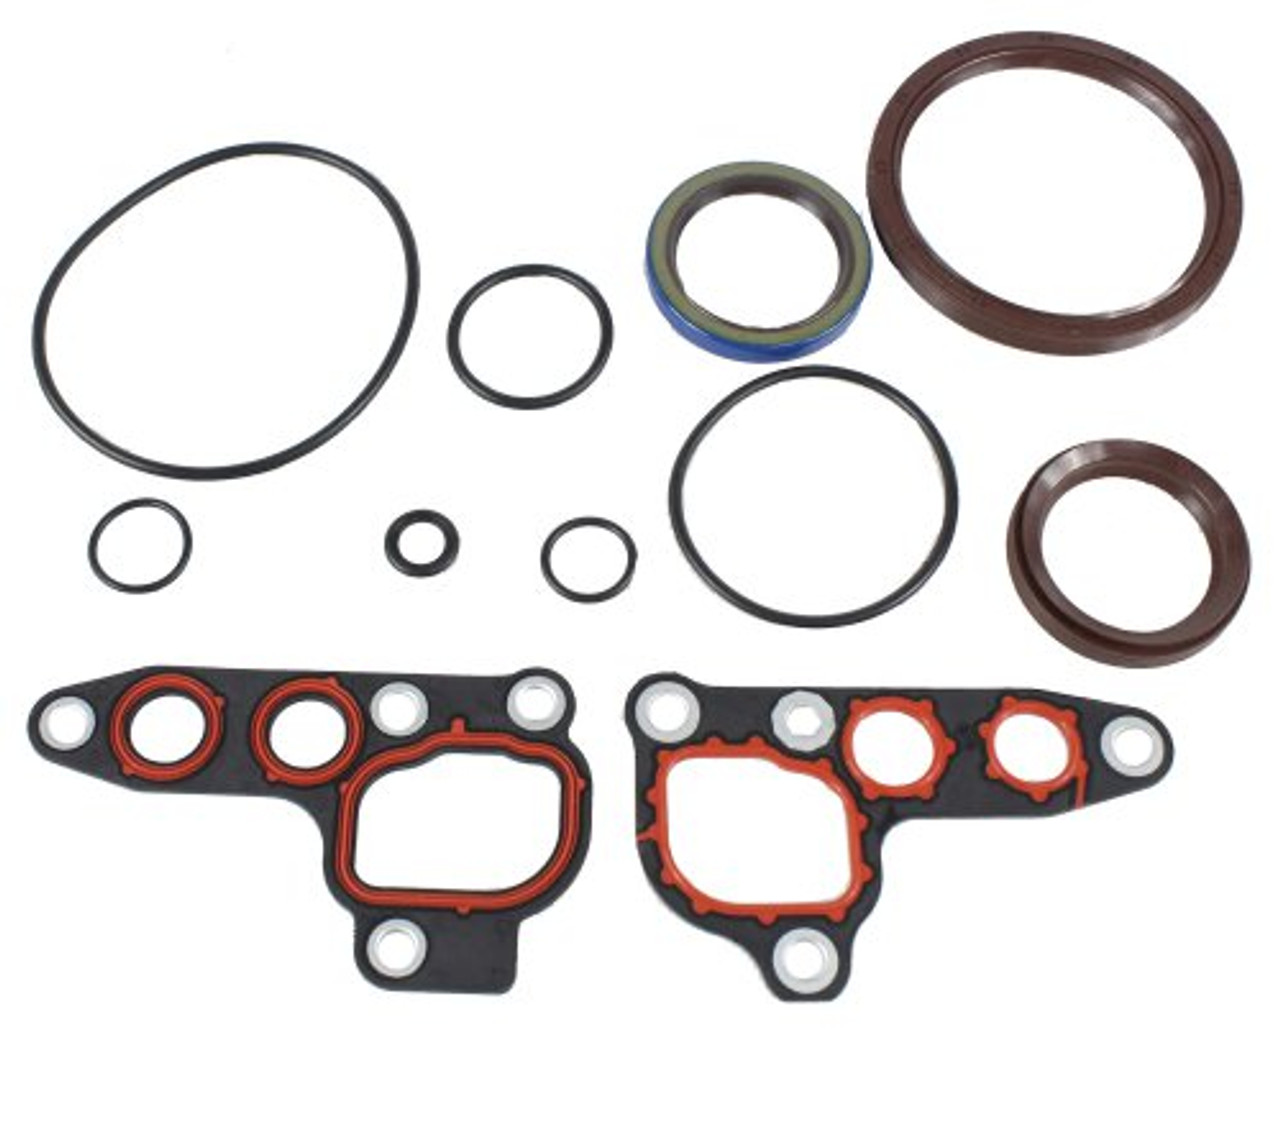 Lower Gasket Set - 2010 Ford Expedition 5.4L Engine Parts # LGS4150ZE169